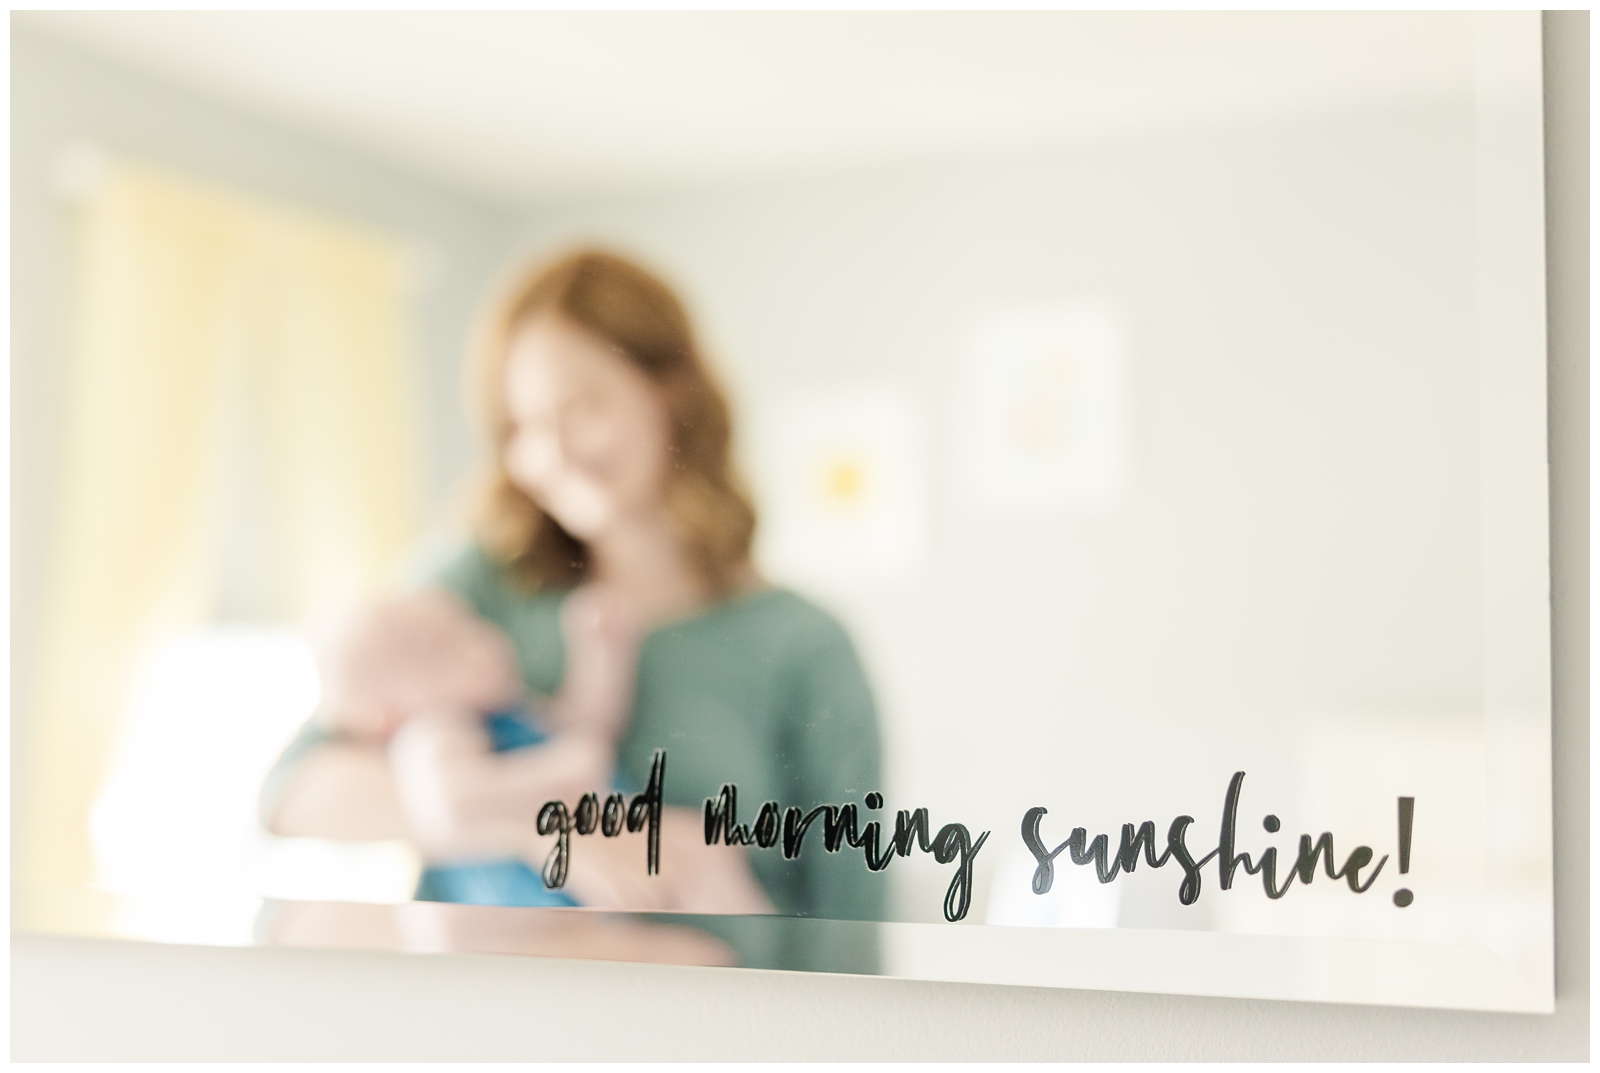 Good Morning Sunshine mirror decal with mom holding baby in the background